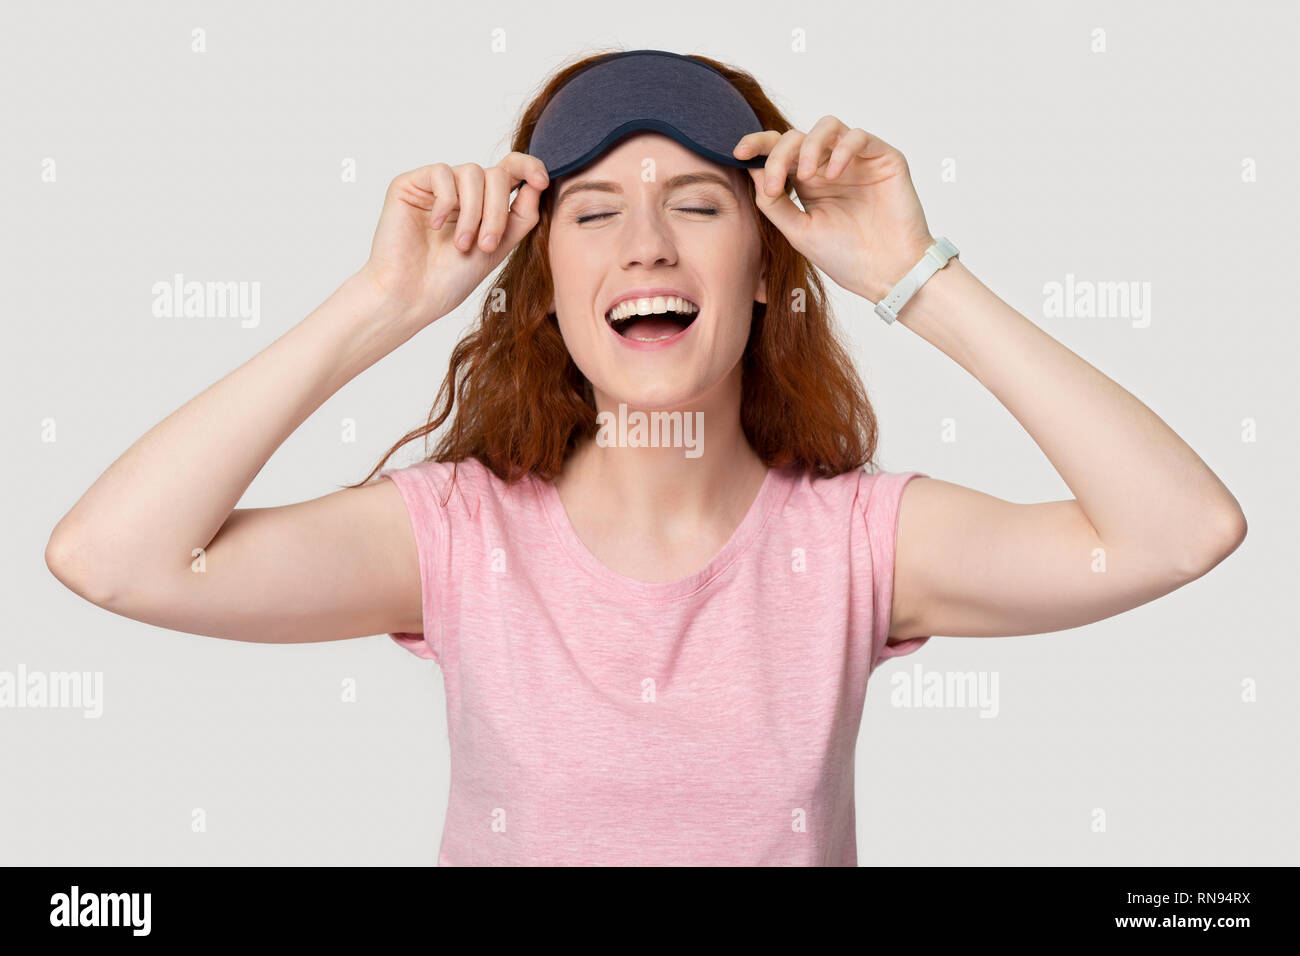 Happy funny red-haired woman laughing portant ce masque de sommeil Banque D'Images